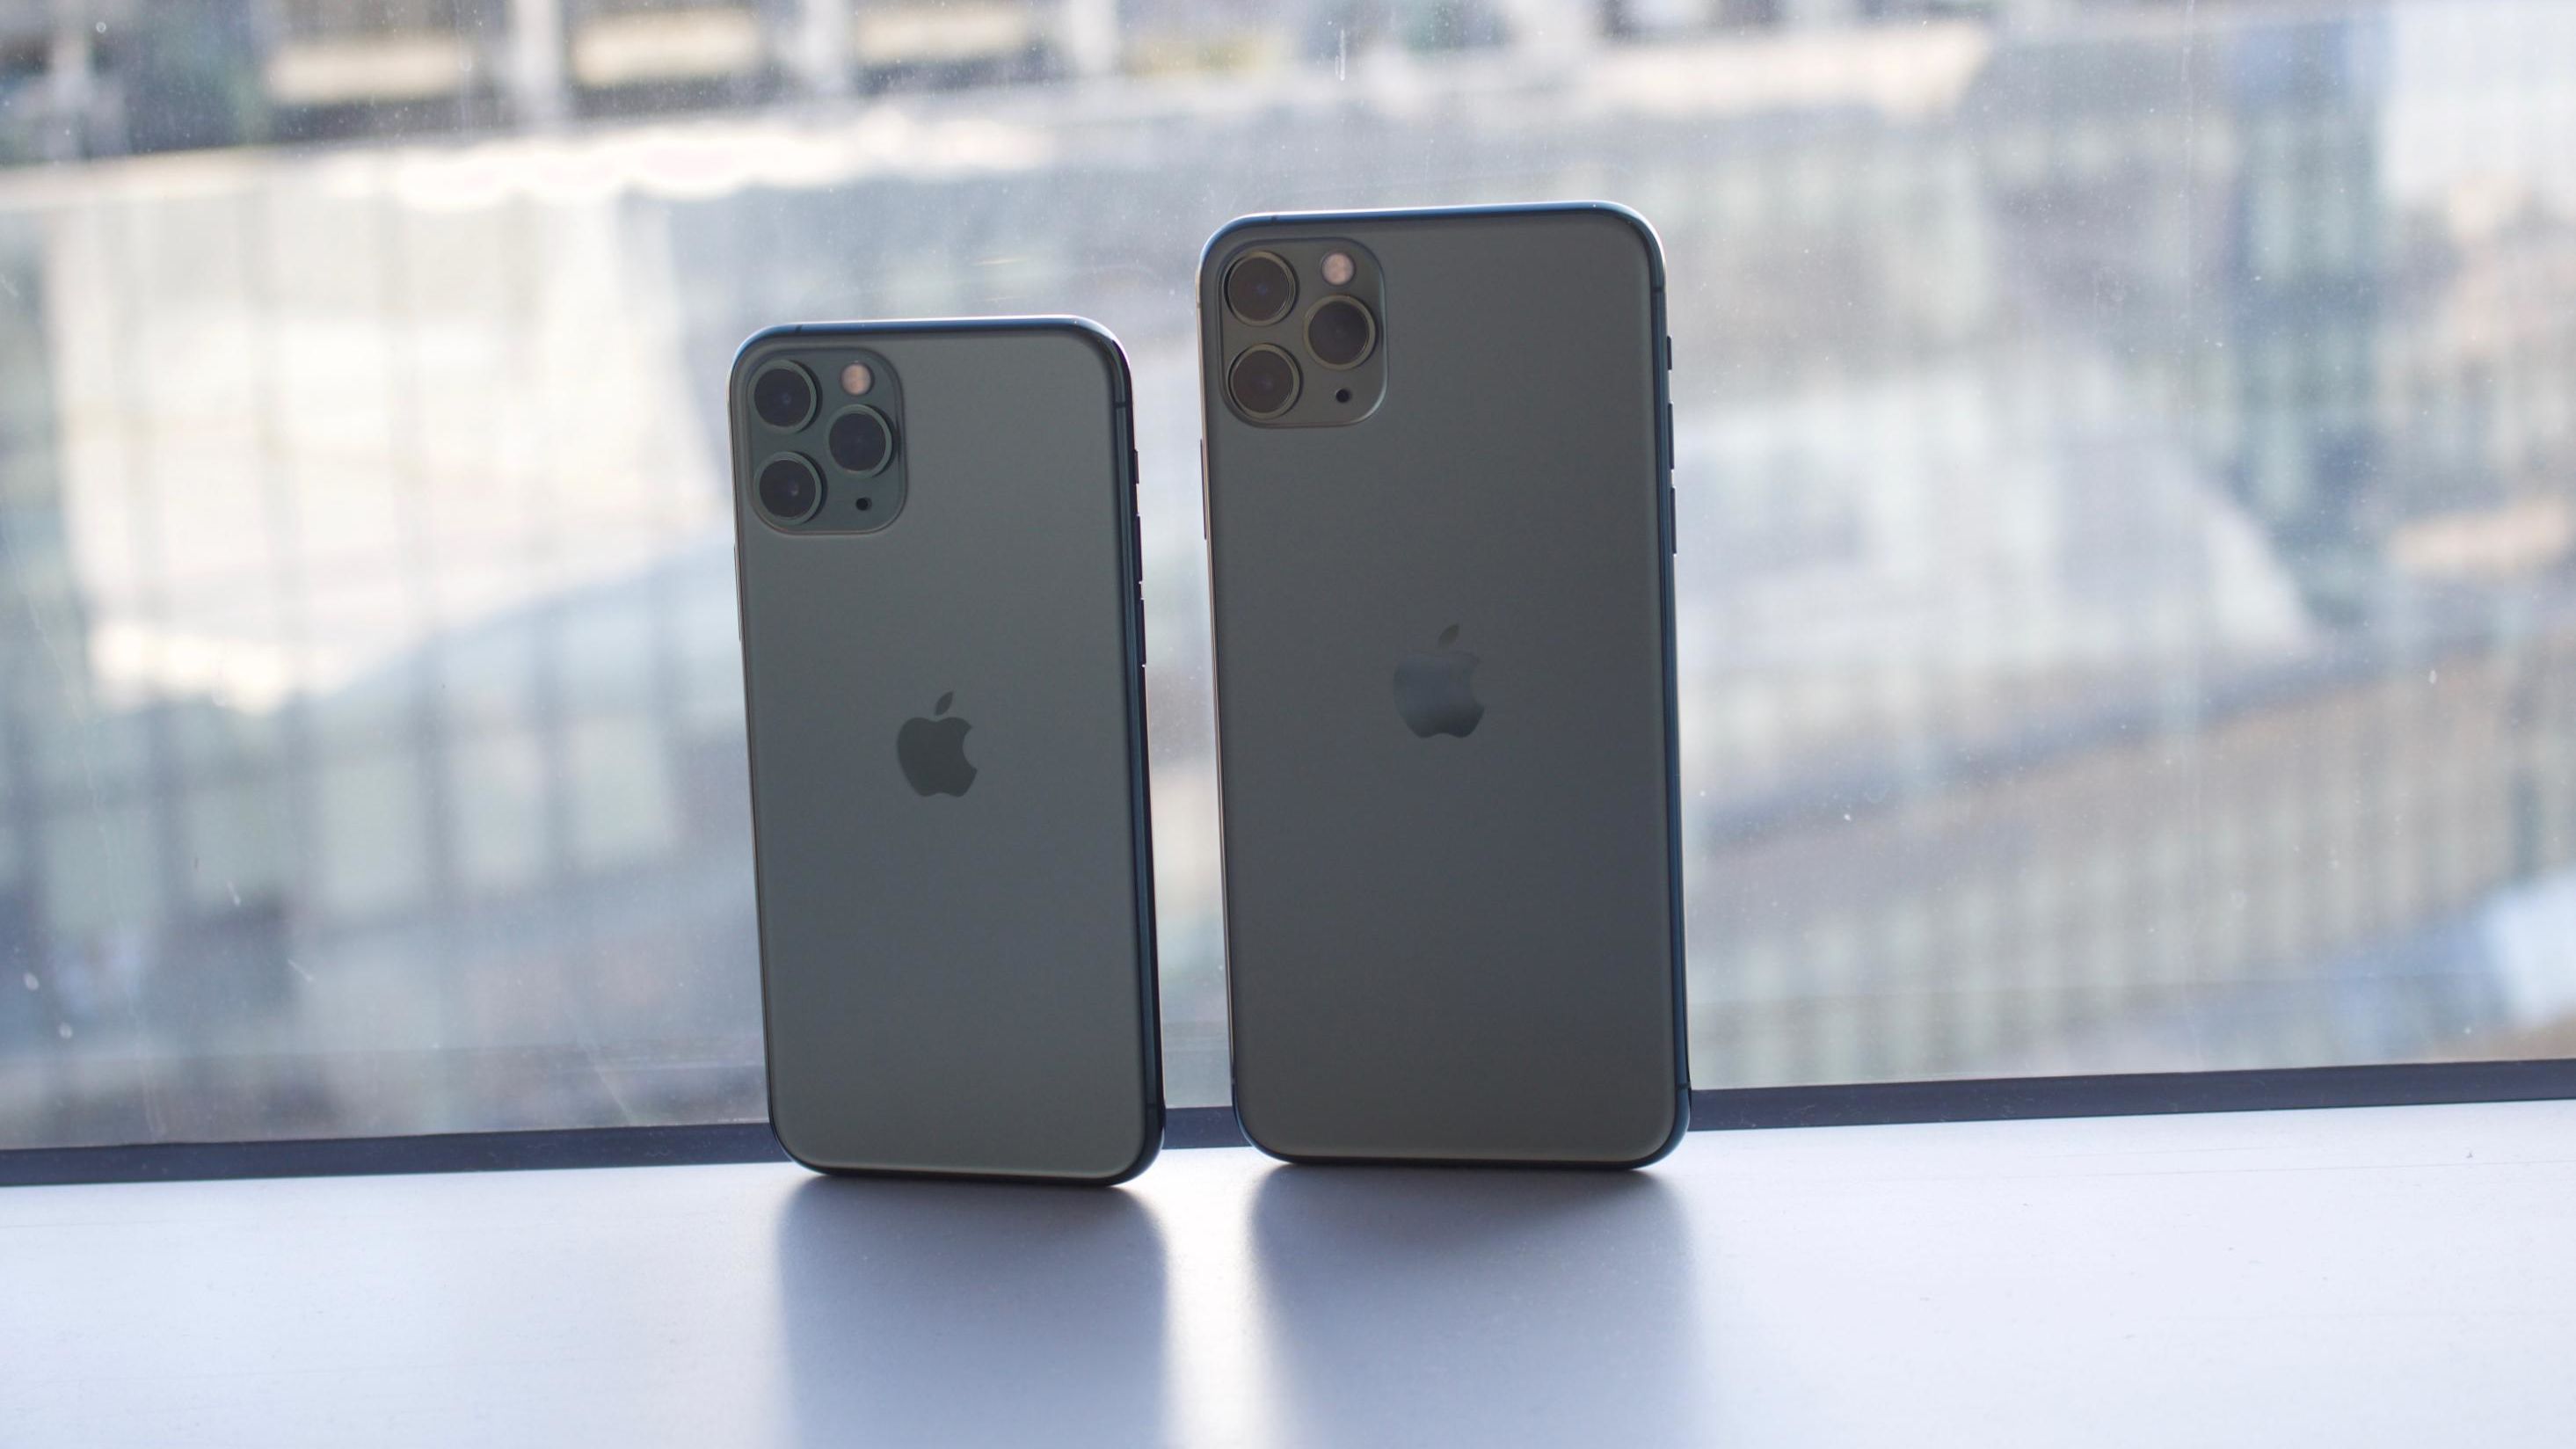 Apple iPhone 11 Pro Max Review: The iPhone for all seasons